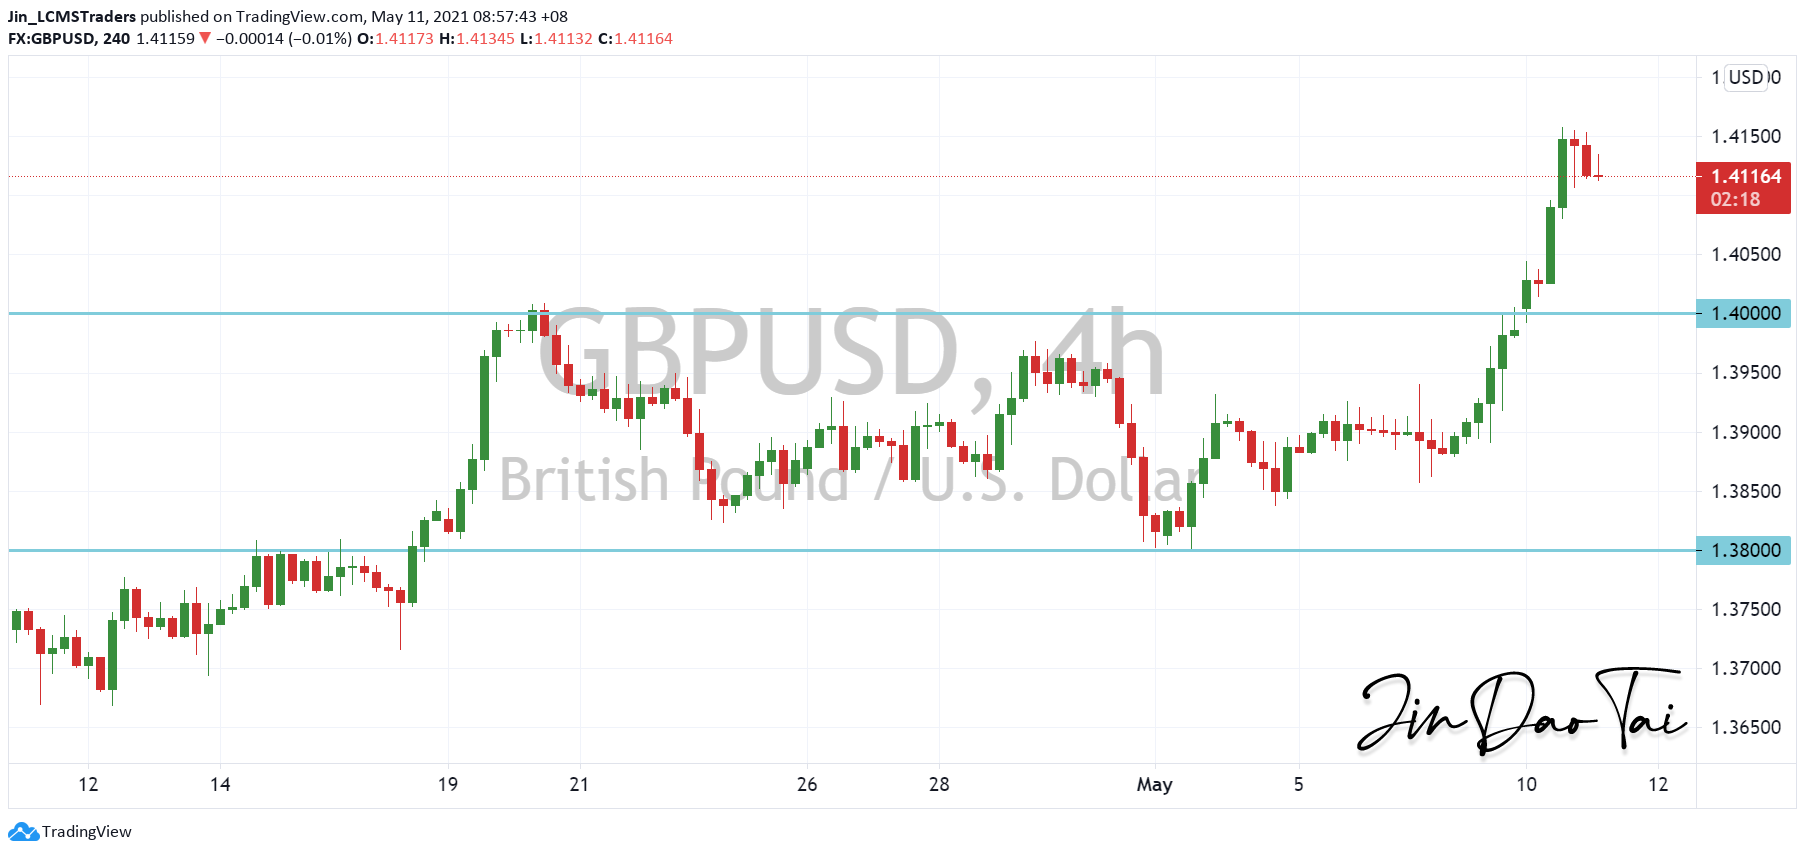 GBP/USD Outlook (11 May 2021)